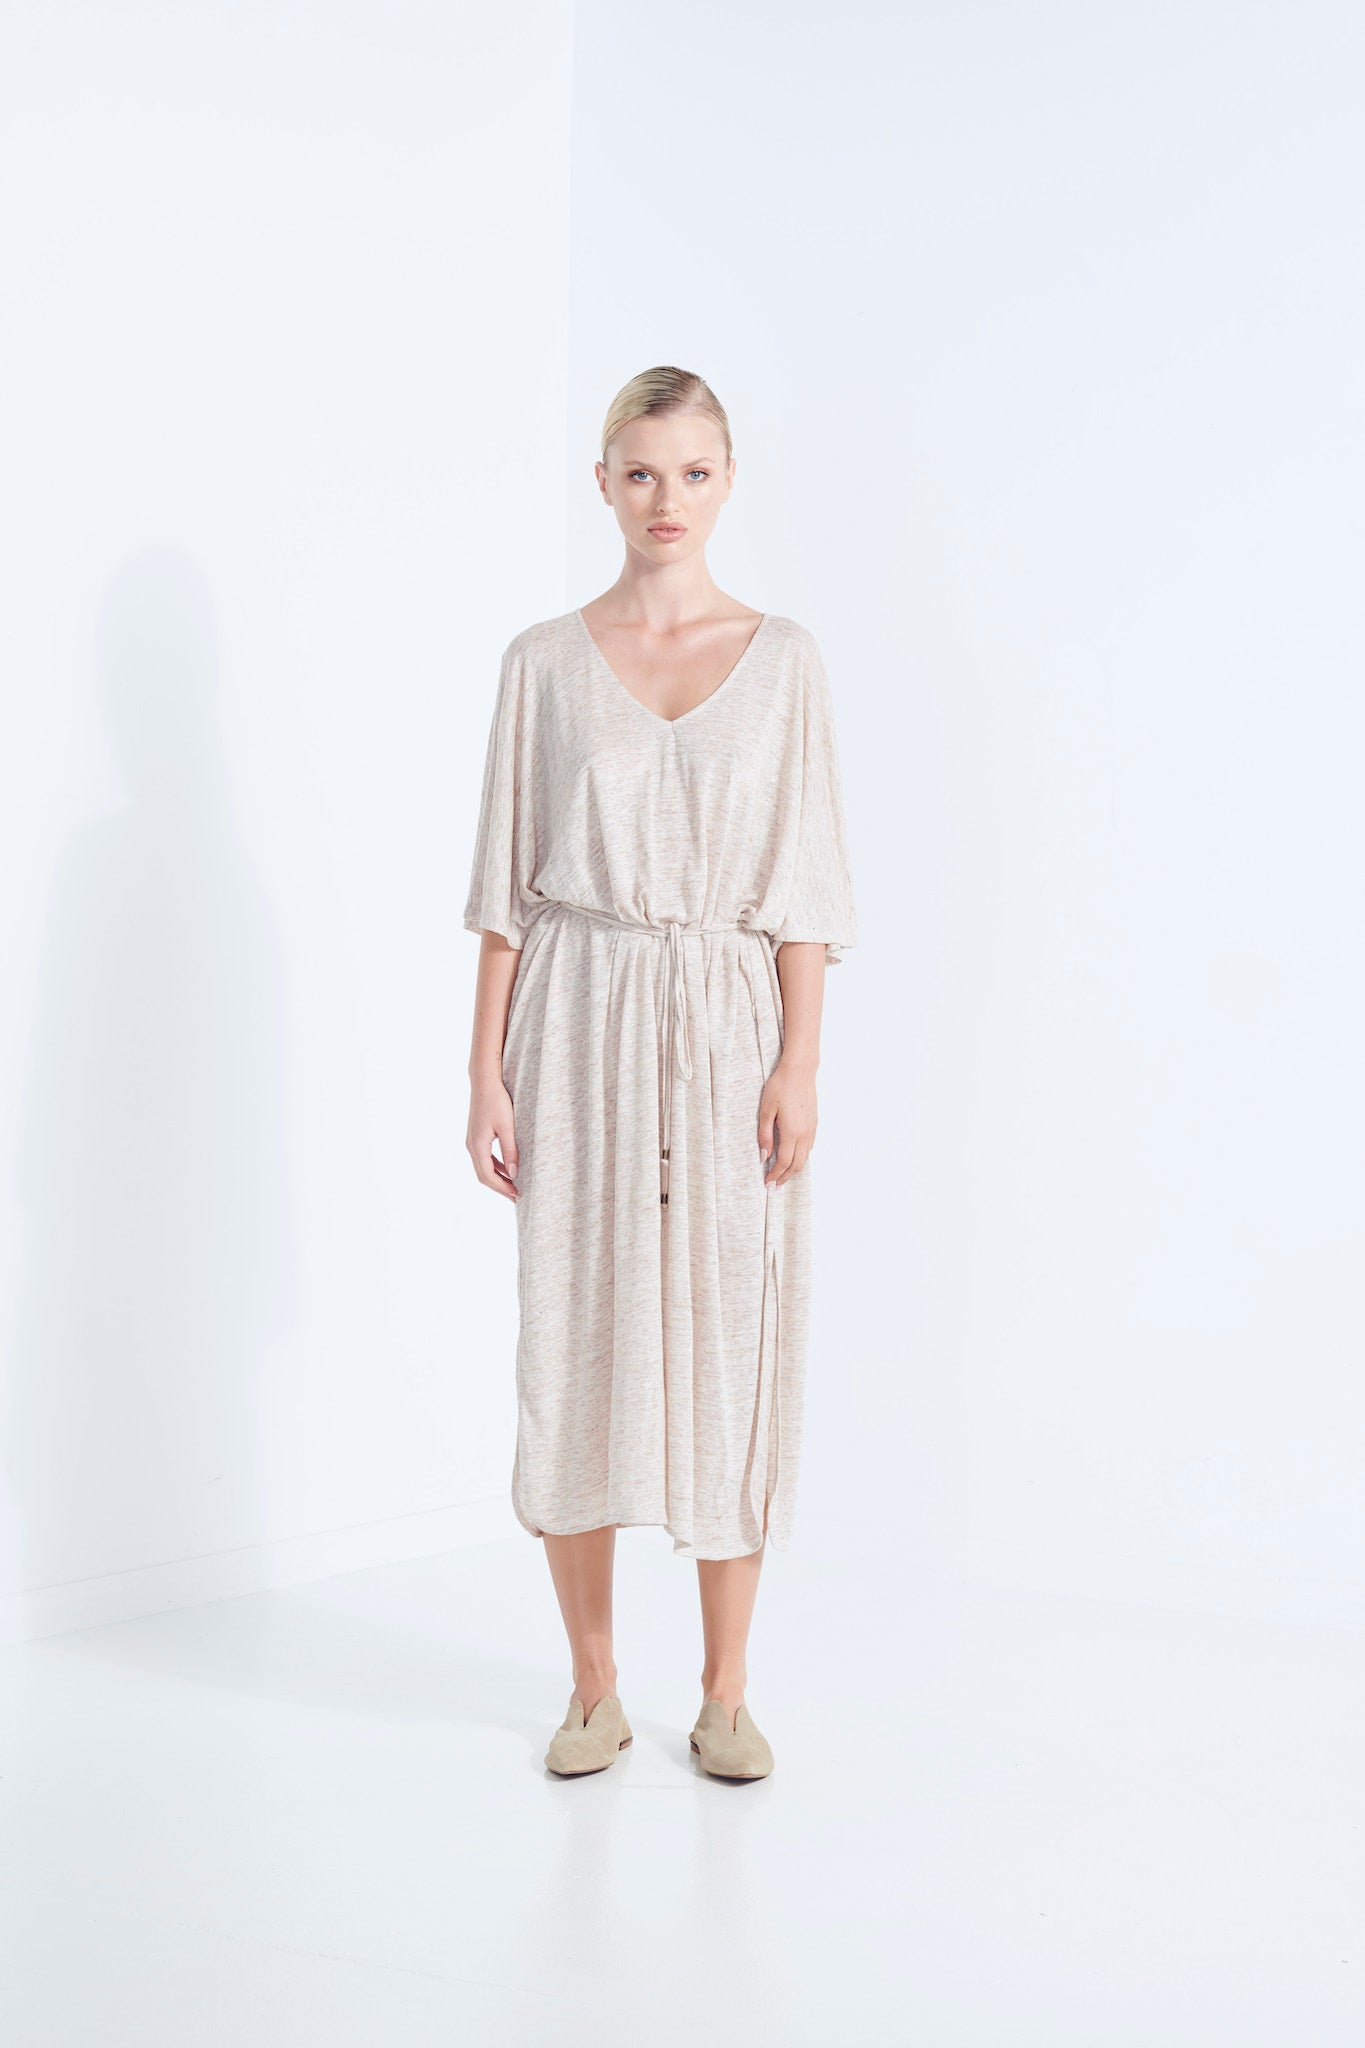 ZEUS DRESS PURE LINEN NATURAL YARN IN WICKER WITH SIDE HEM SCOOP AND SELF FABRIC TIE  FRONT VIEW WITH TIE 